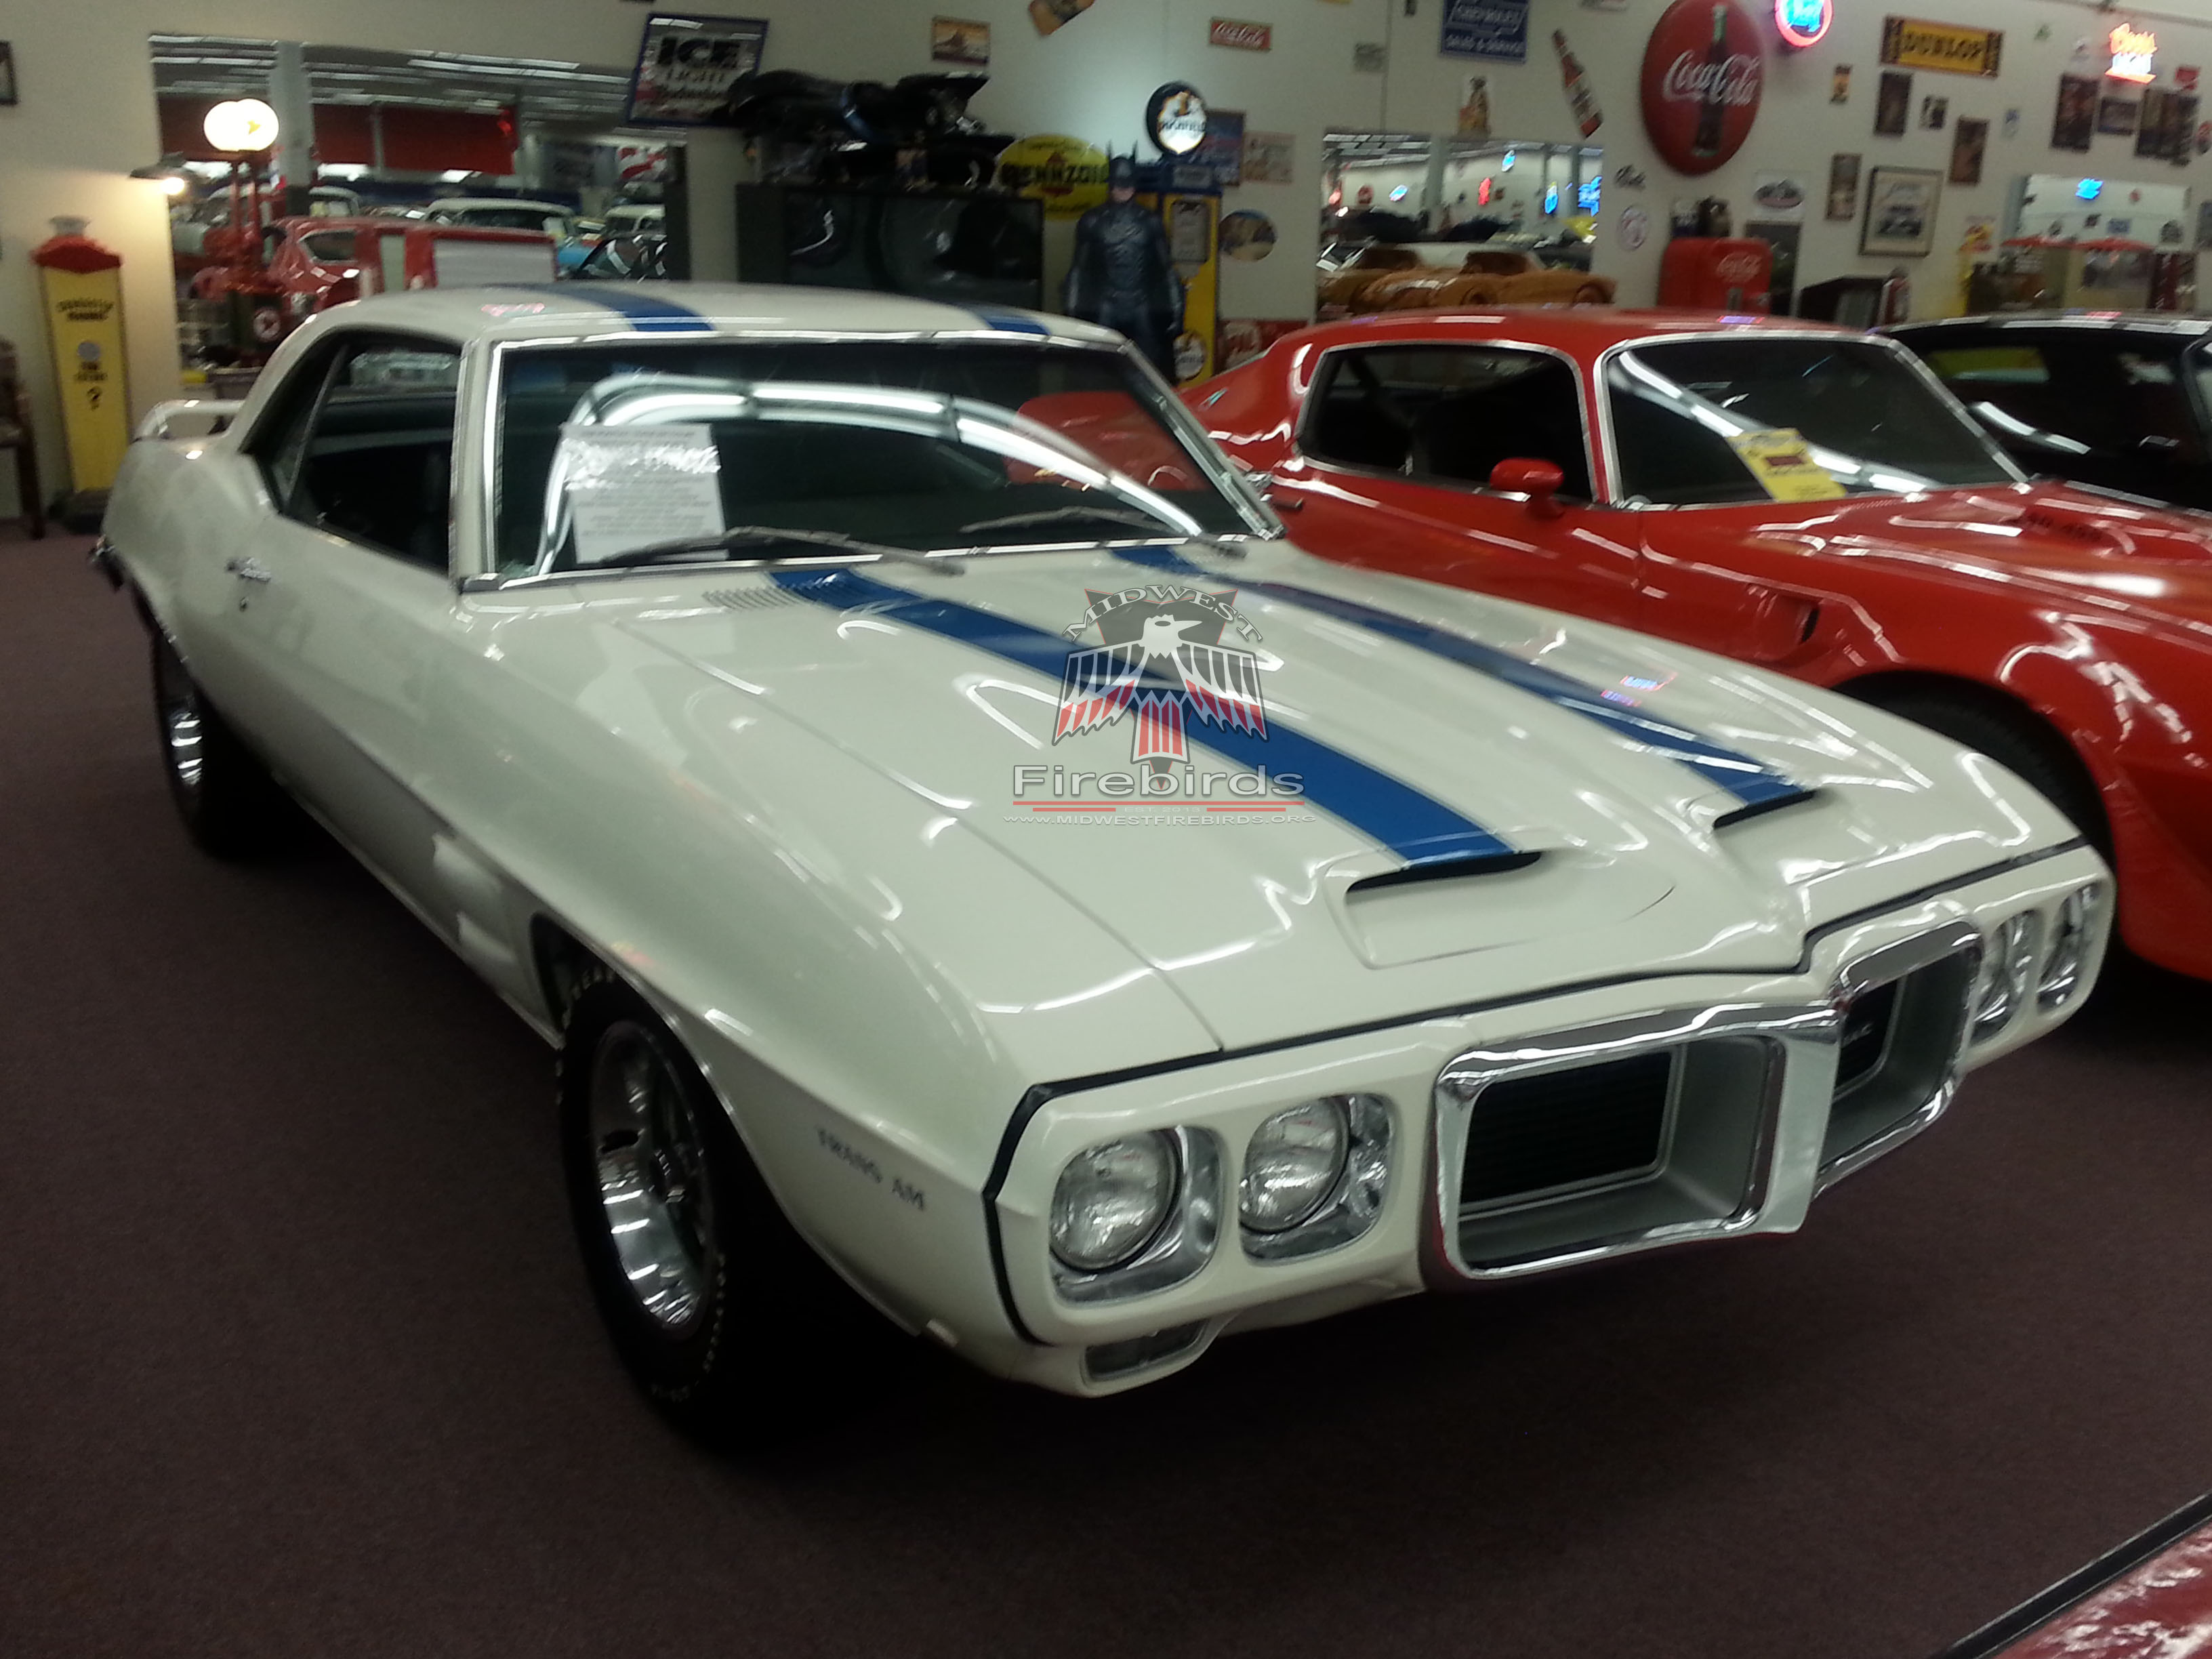 This 1969 Pontiac Firebird Trans Am coupe is displayed at the Muscle Car City Museum, in Punta Gorda, FL.